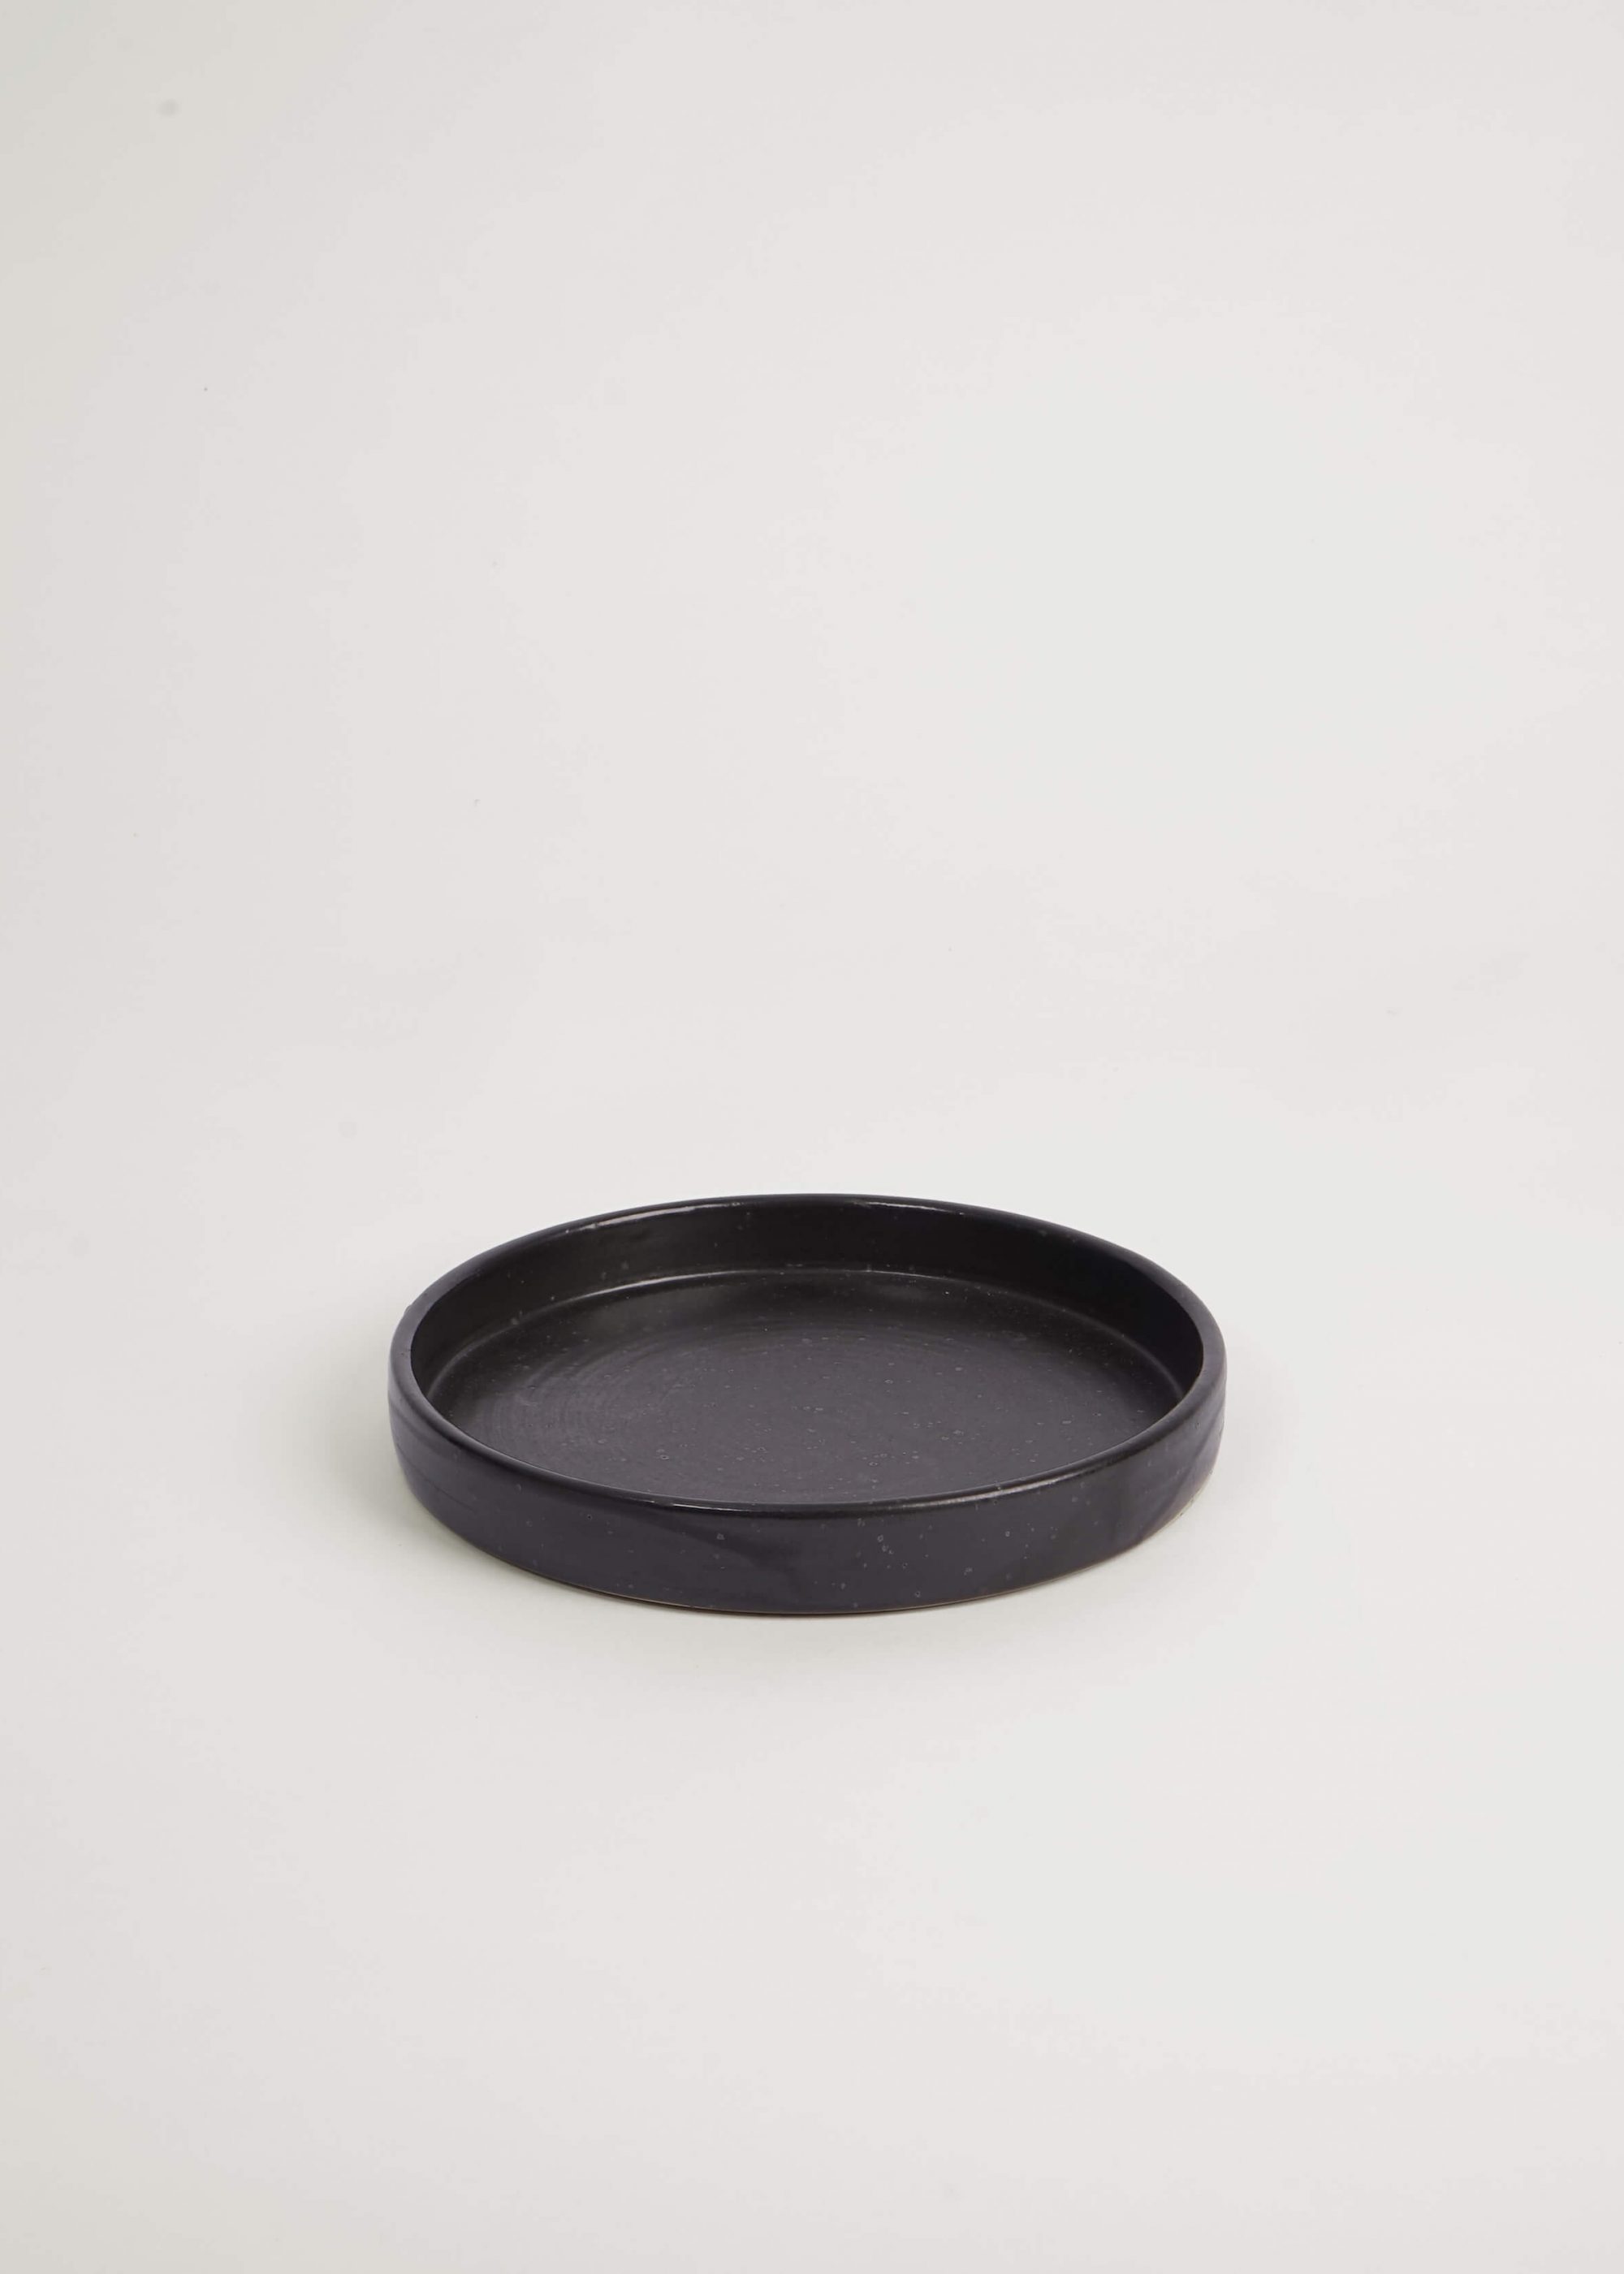 Product image for N° ICD13 Burri Planter Saucer L